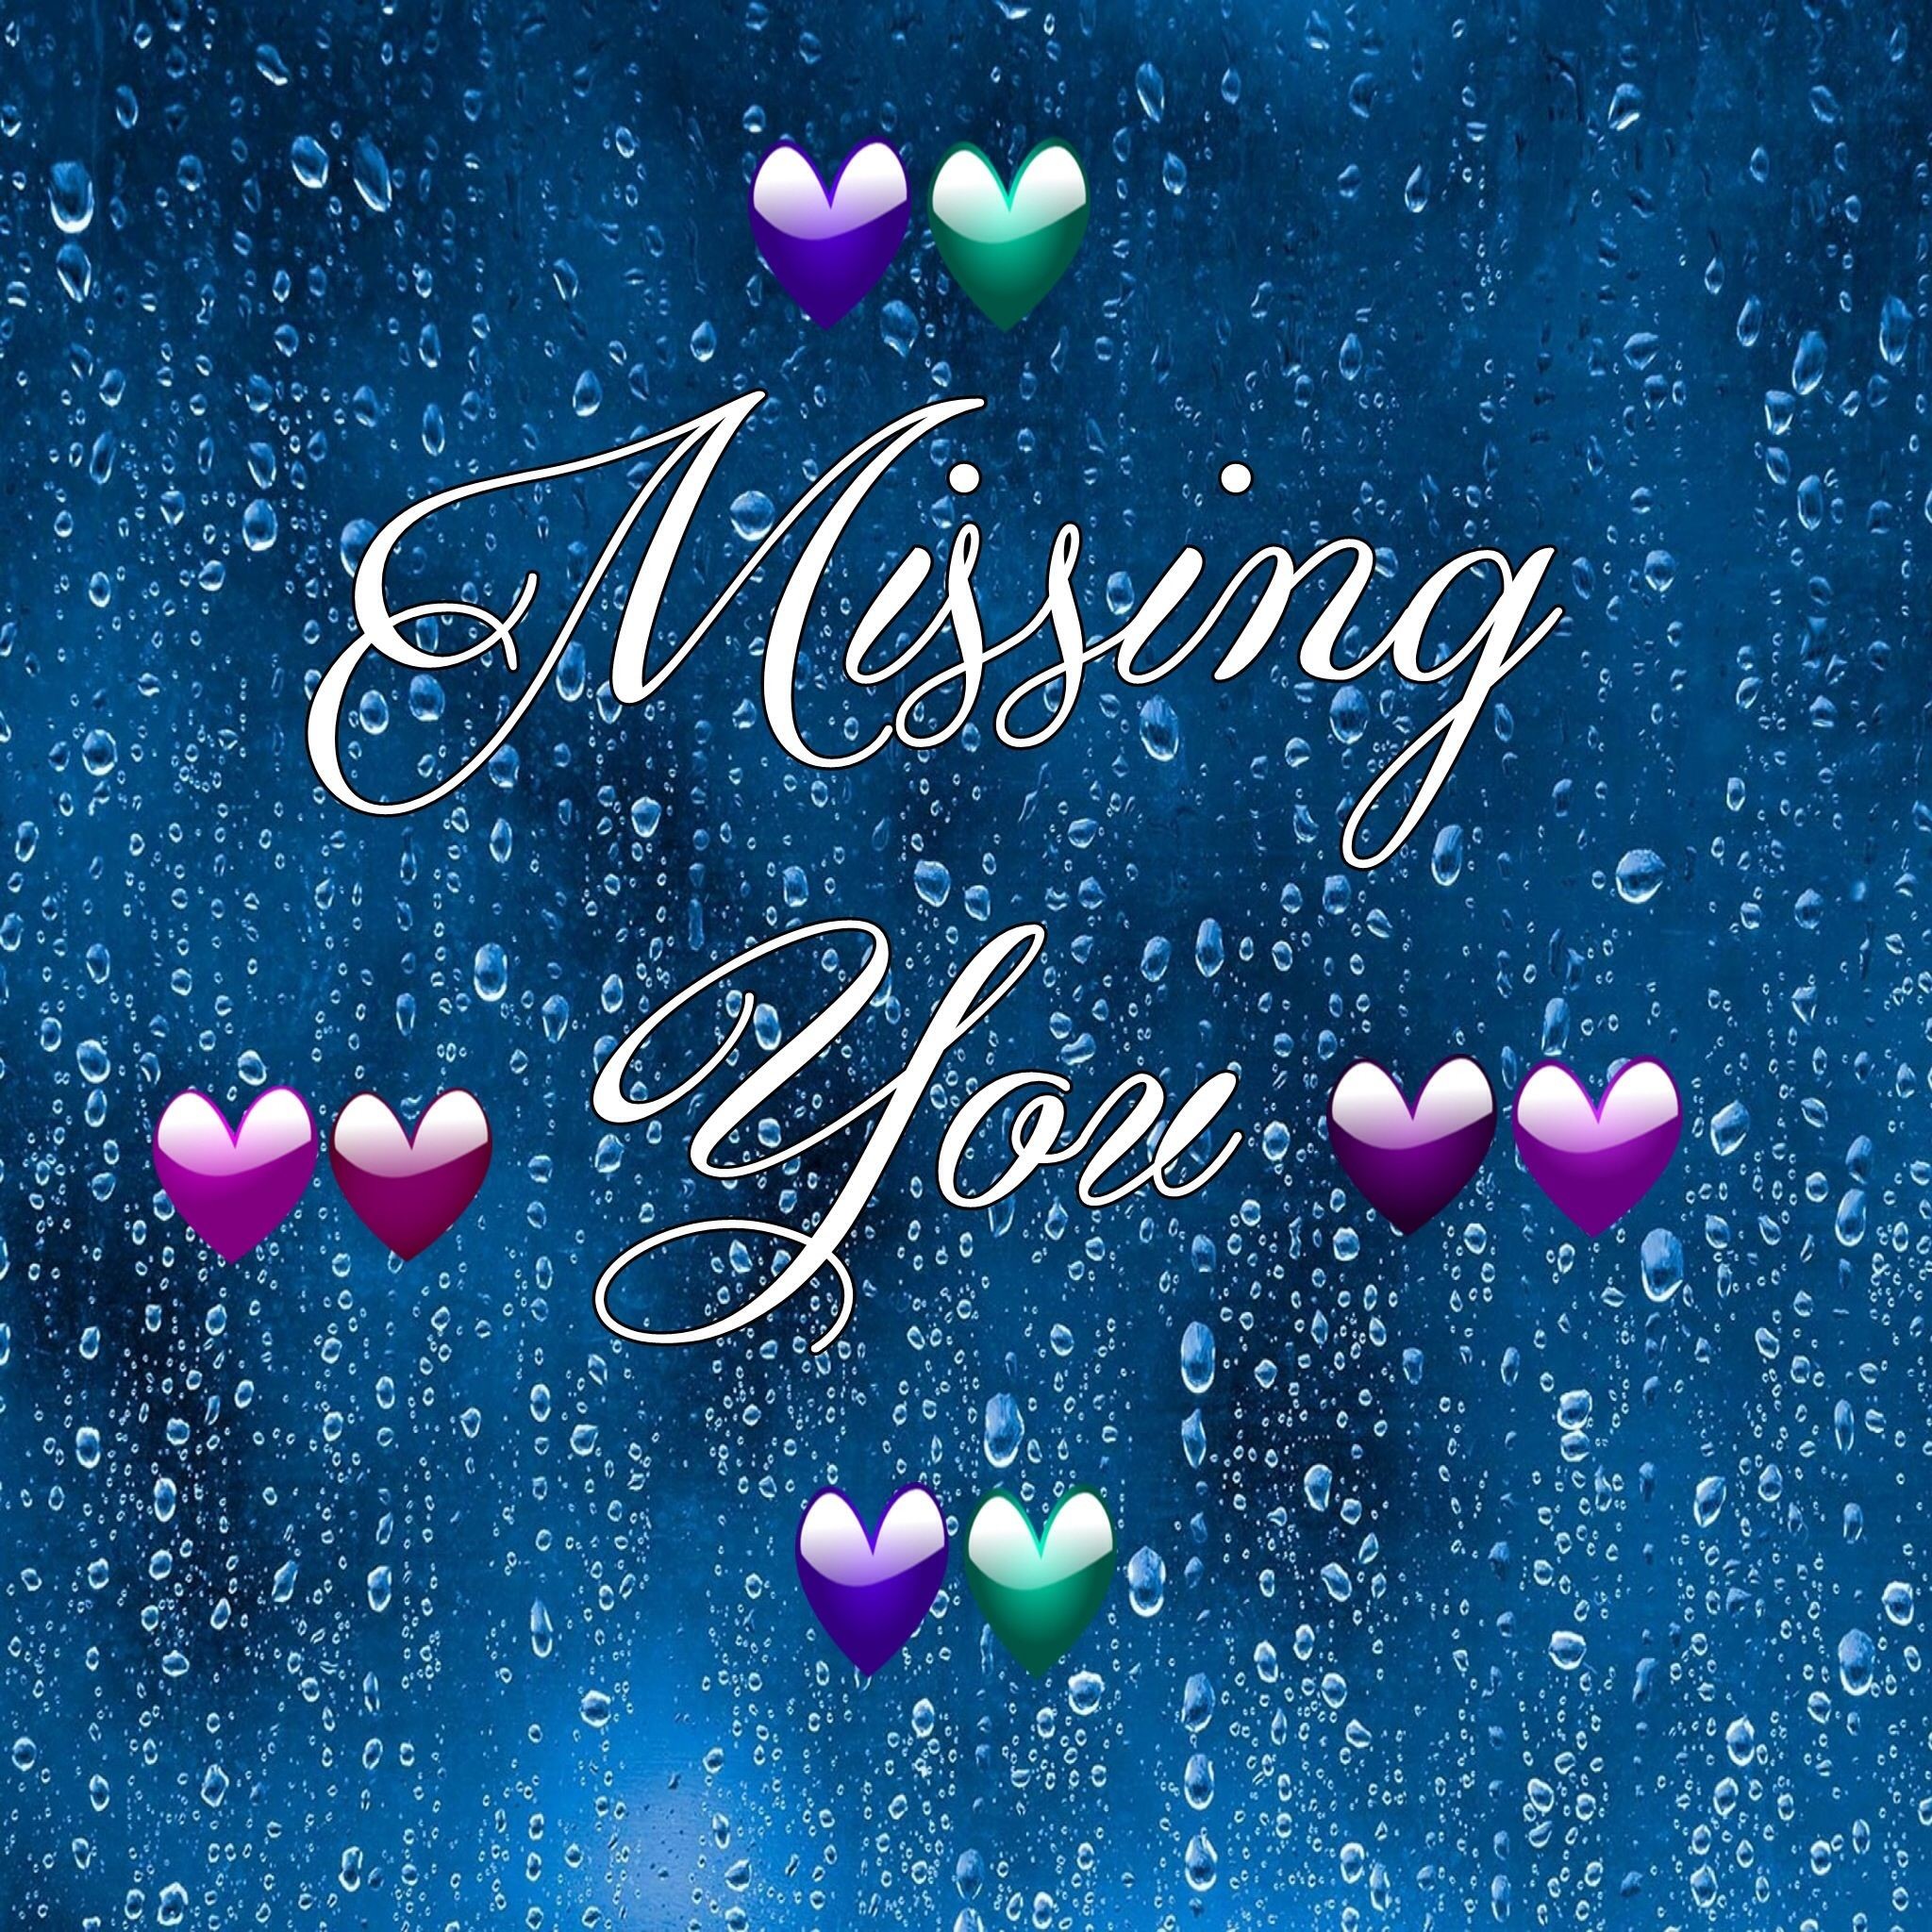 miss u dad wallpapers,text,font,heart,sky,graphic design